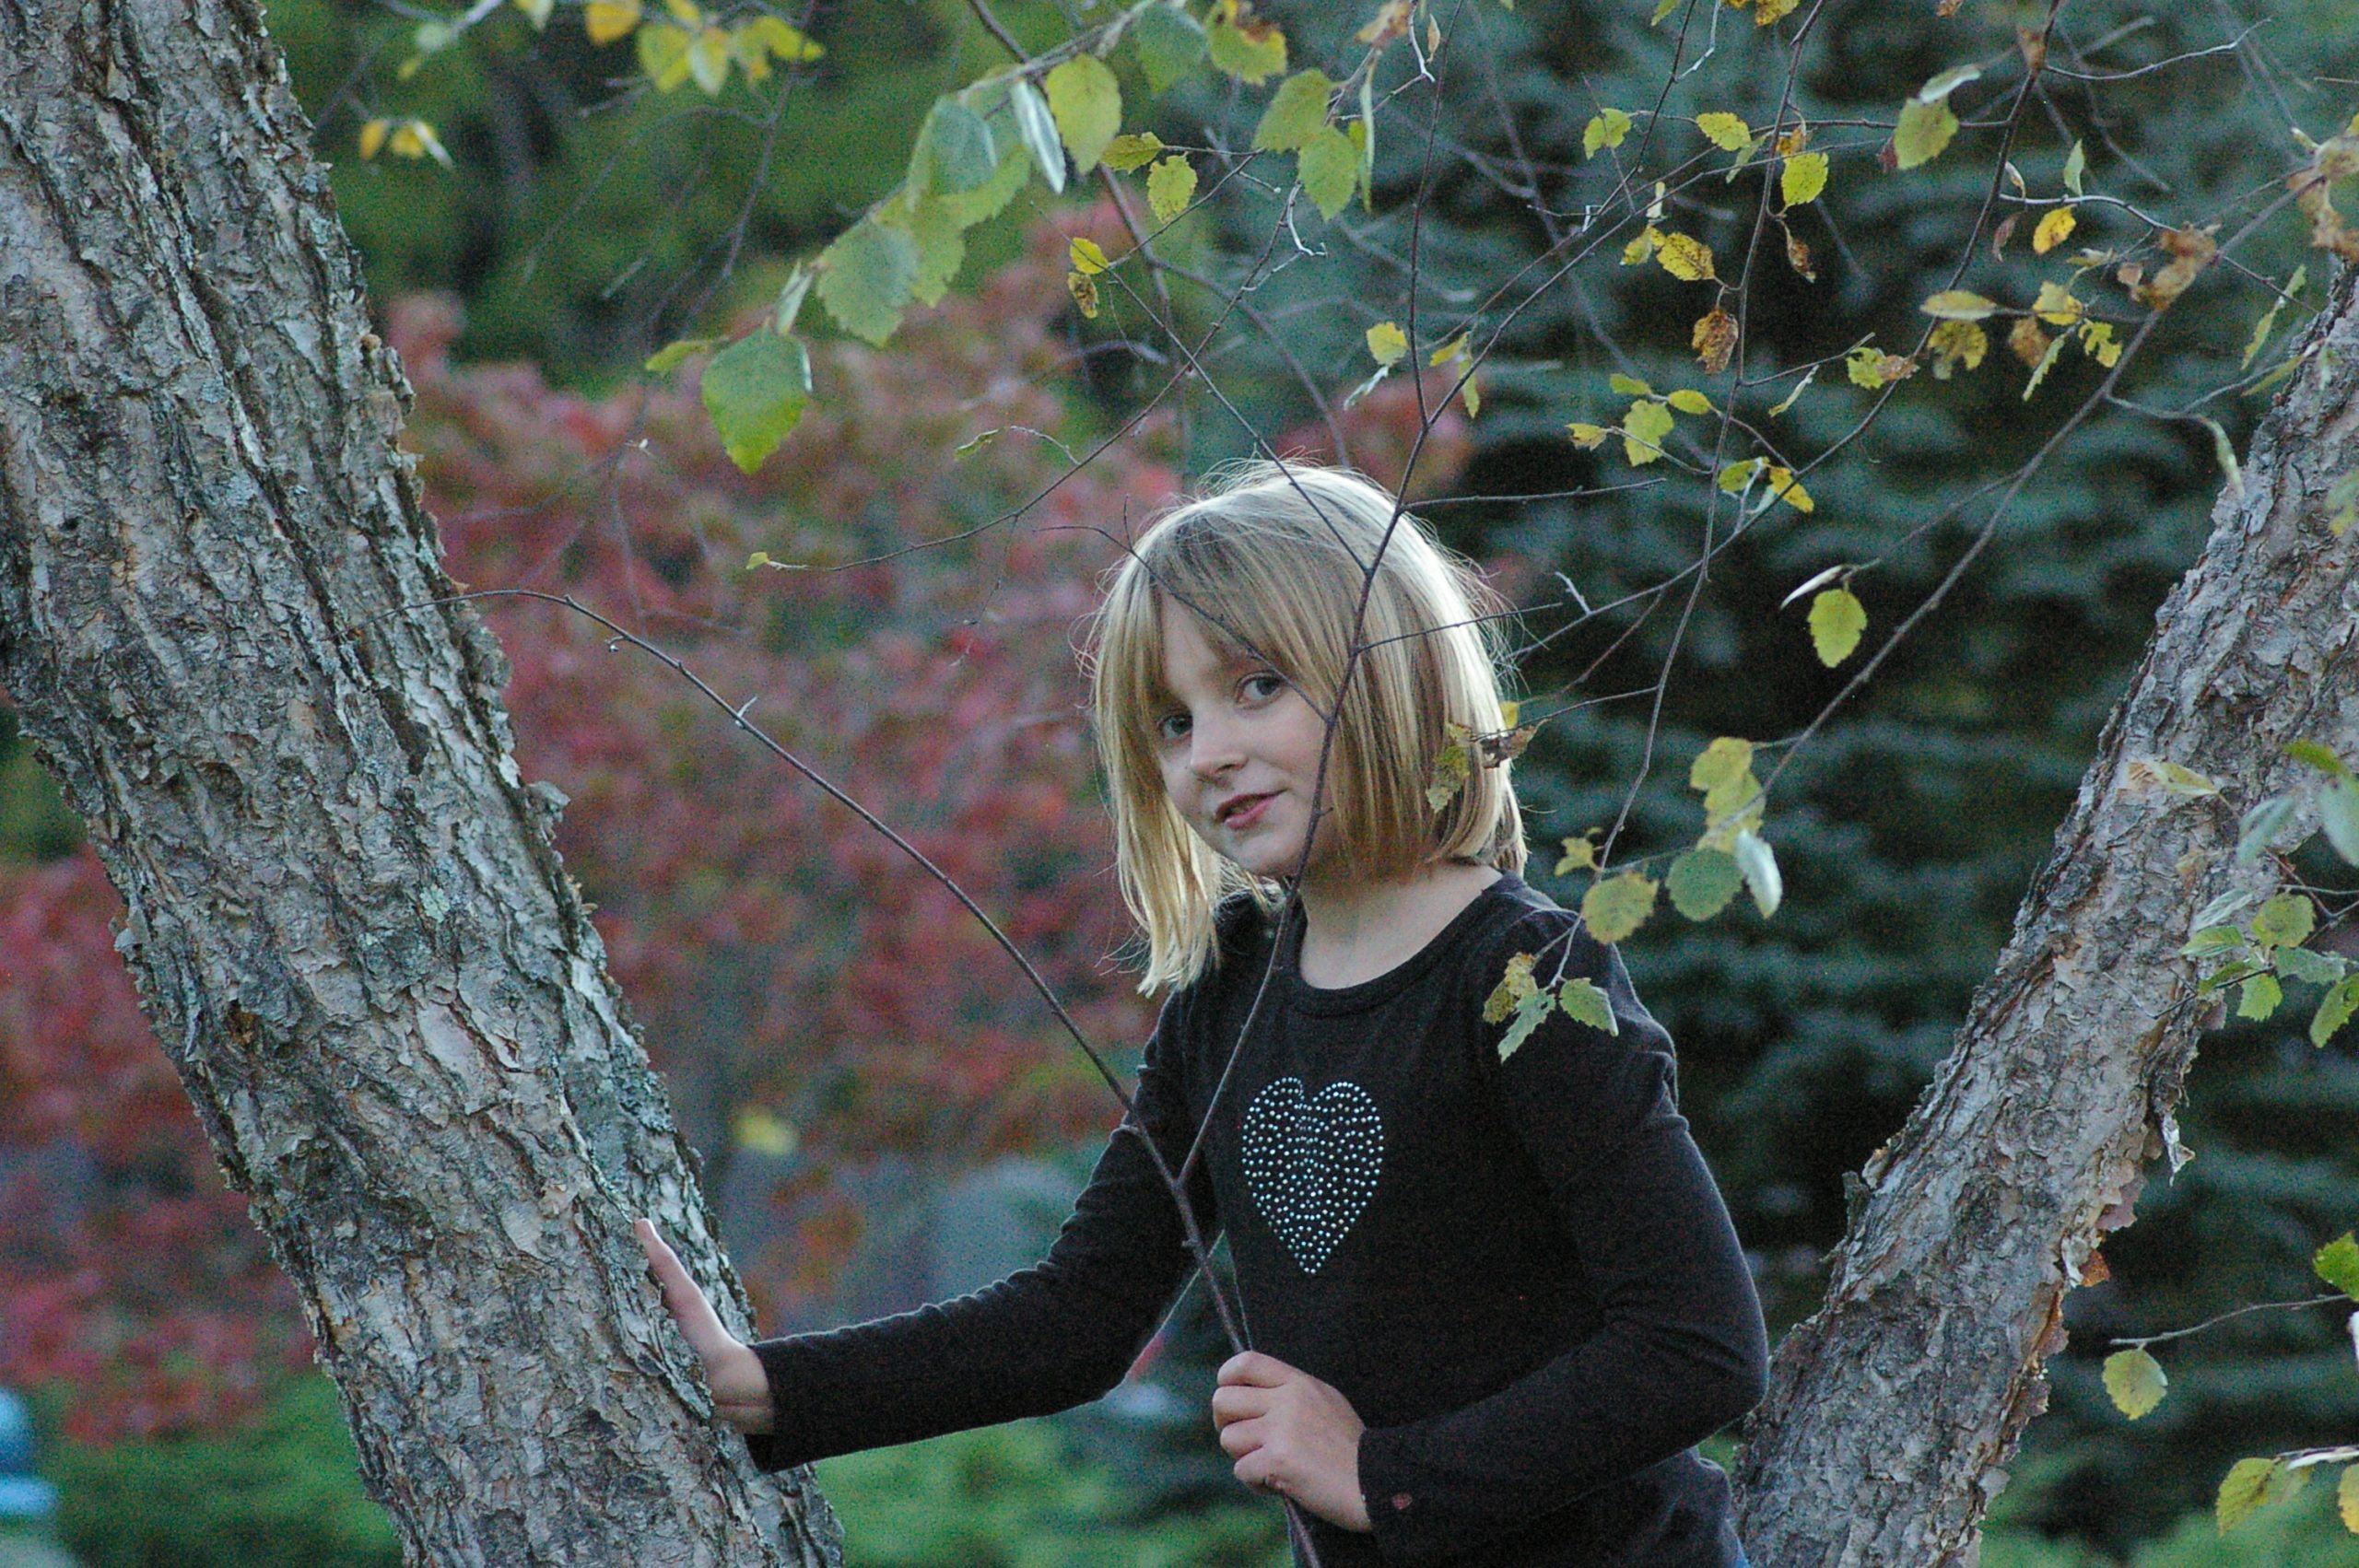 Kid In Tree (user submitted)